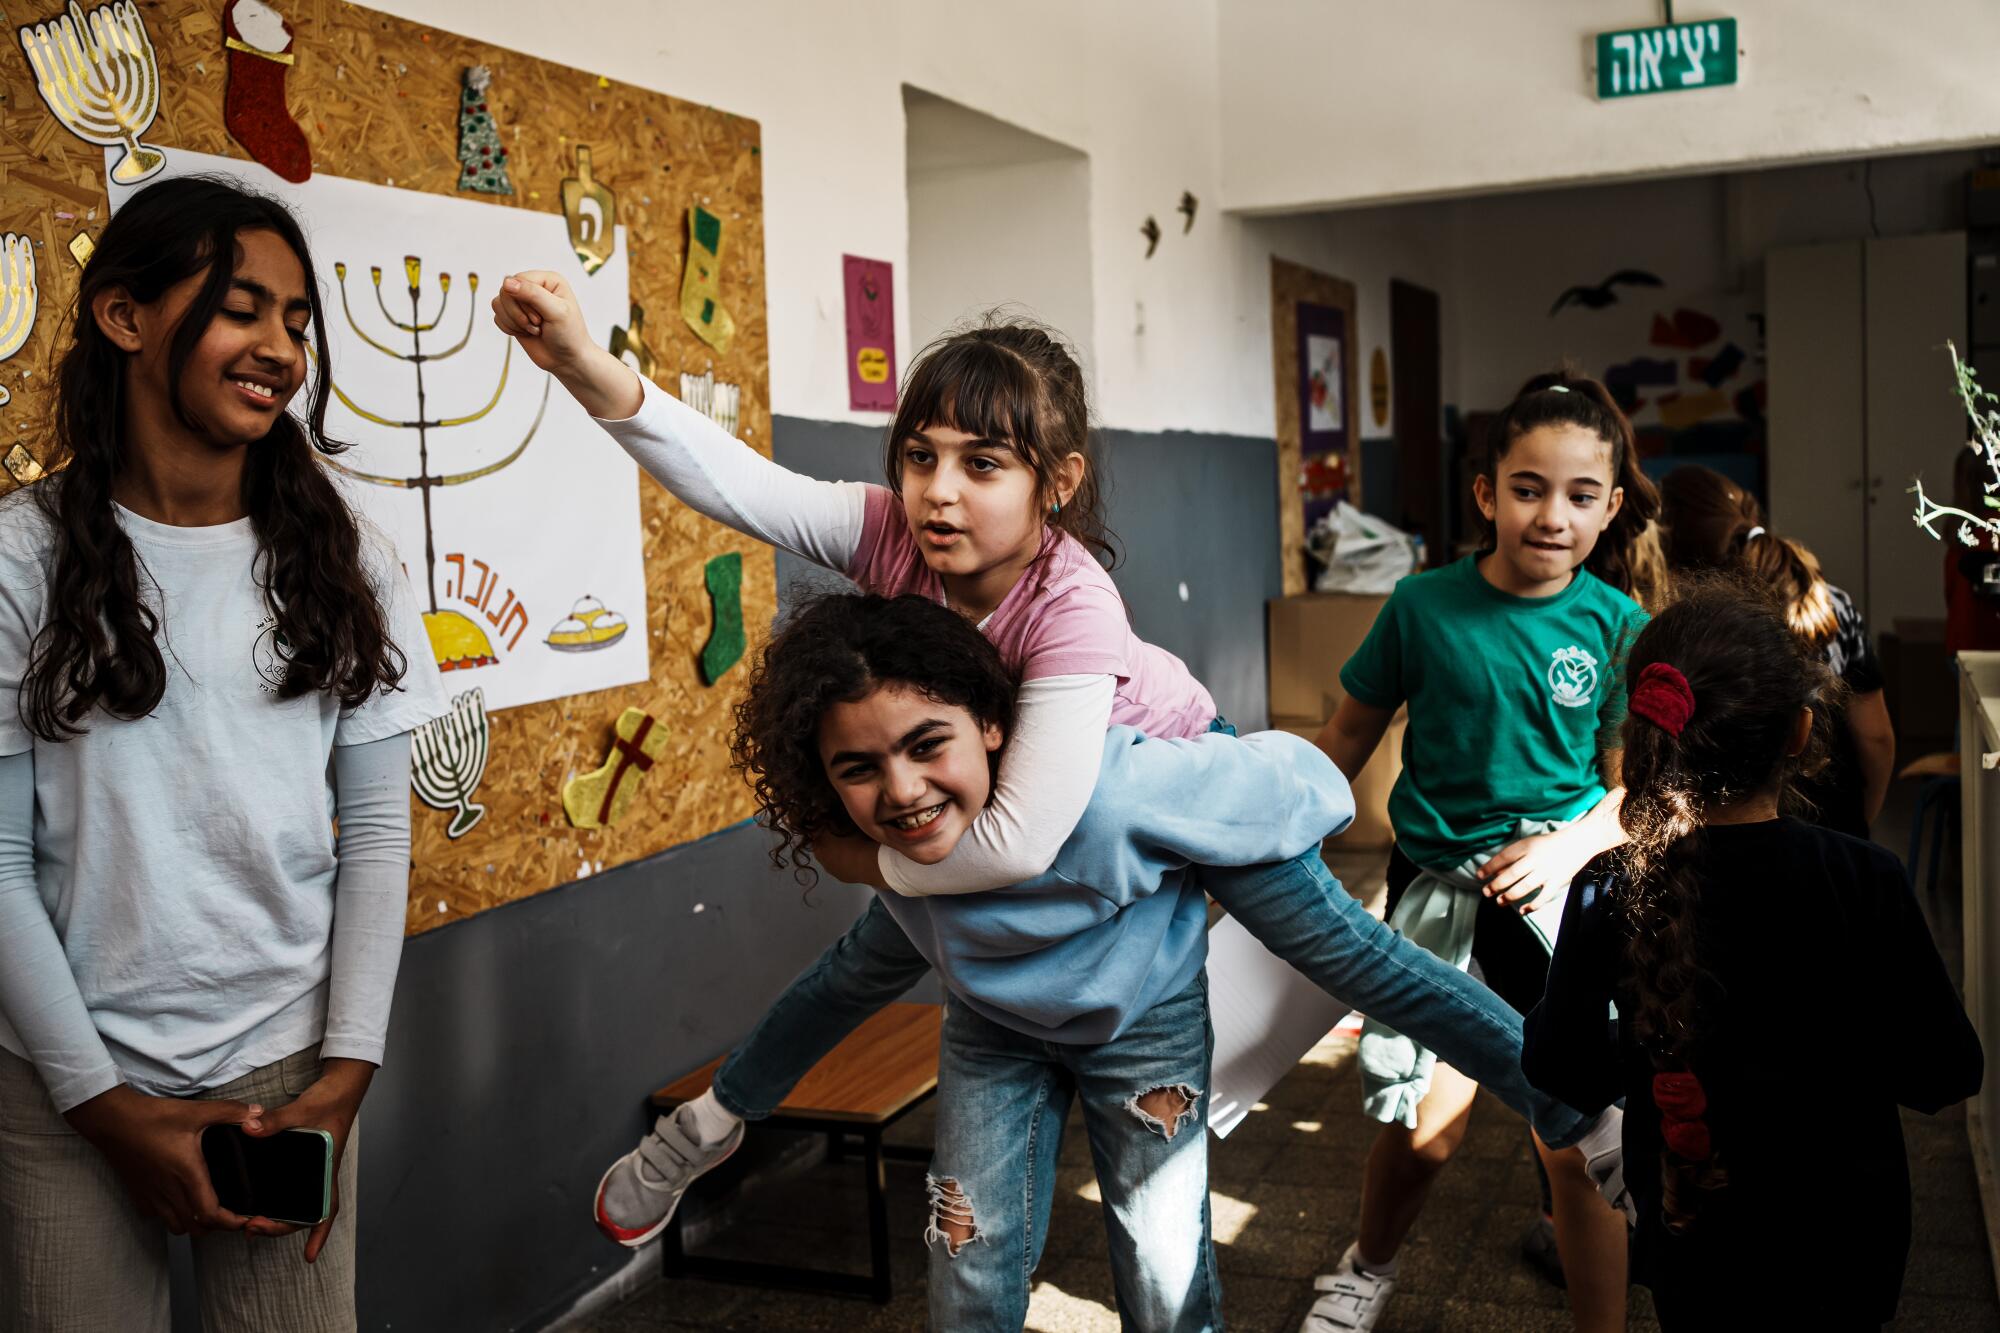 A girl carries another girl on piggyback near a drawing of a menorah on the wall as other girls watch 